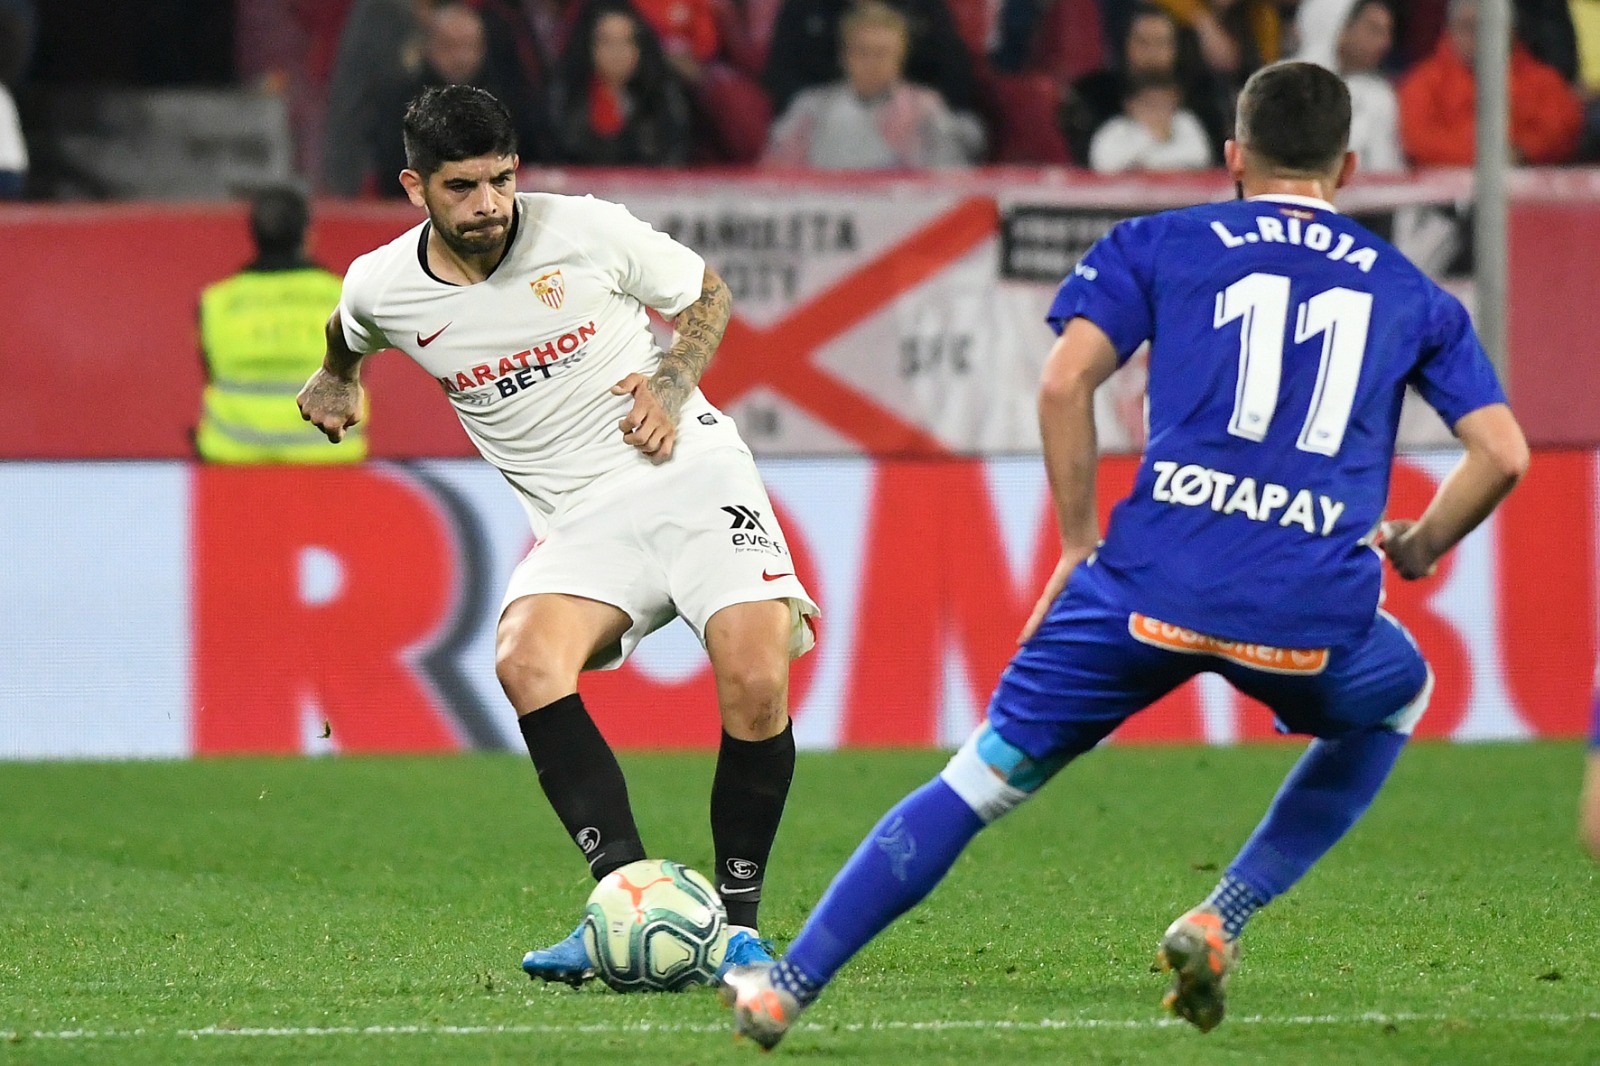 Banega on the ball against Deportivo Alavés